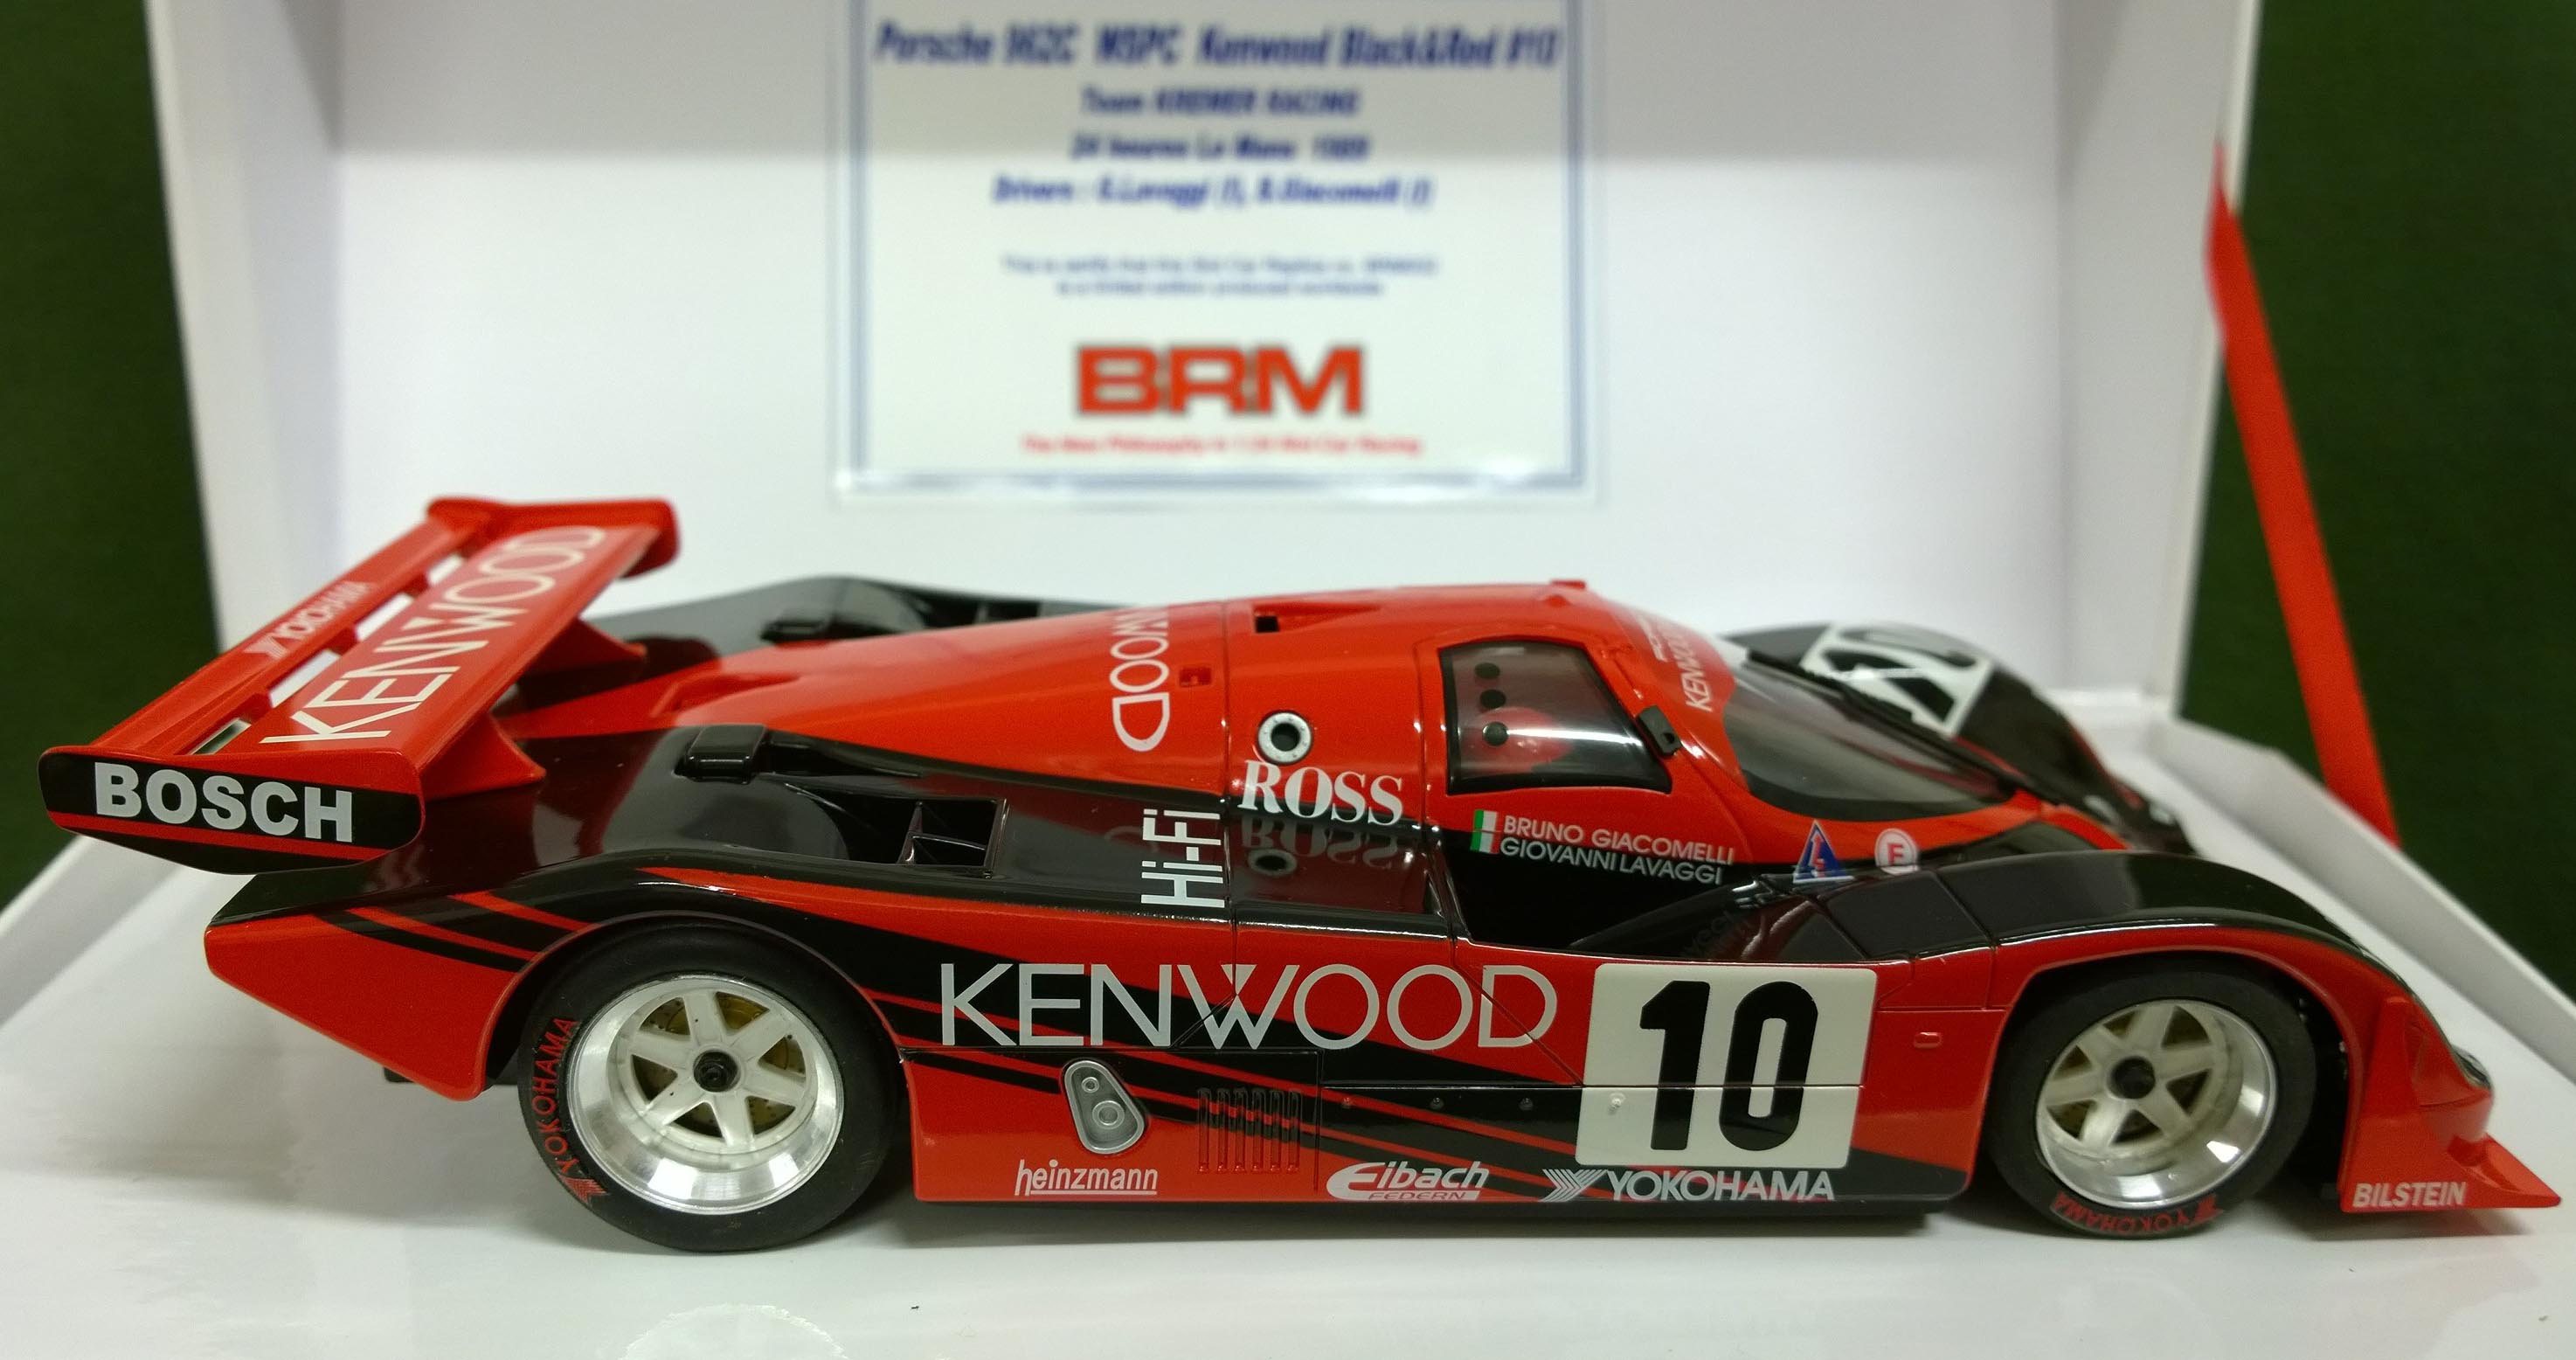 BRM002AW 'Kenwood' Porsche 962C #10 with anglewinder chassis